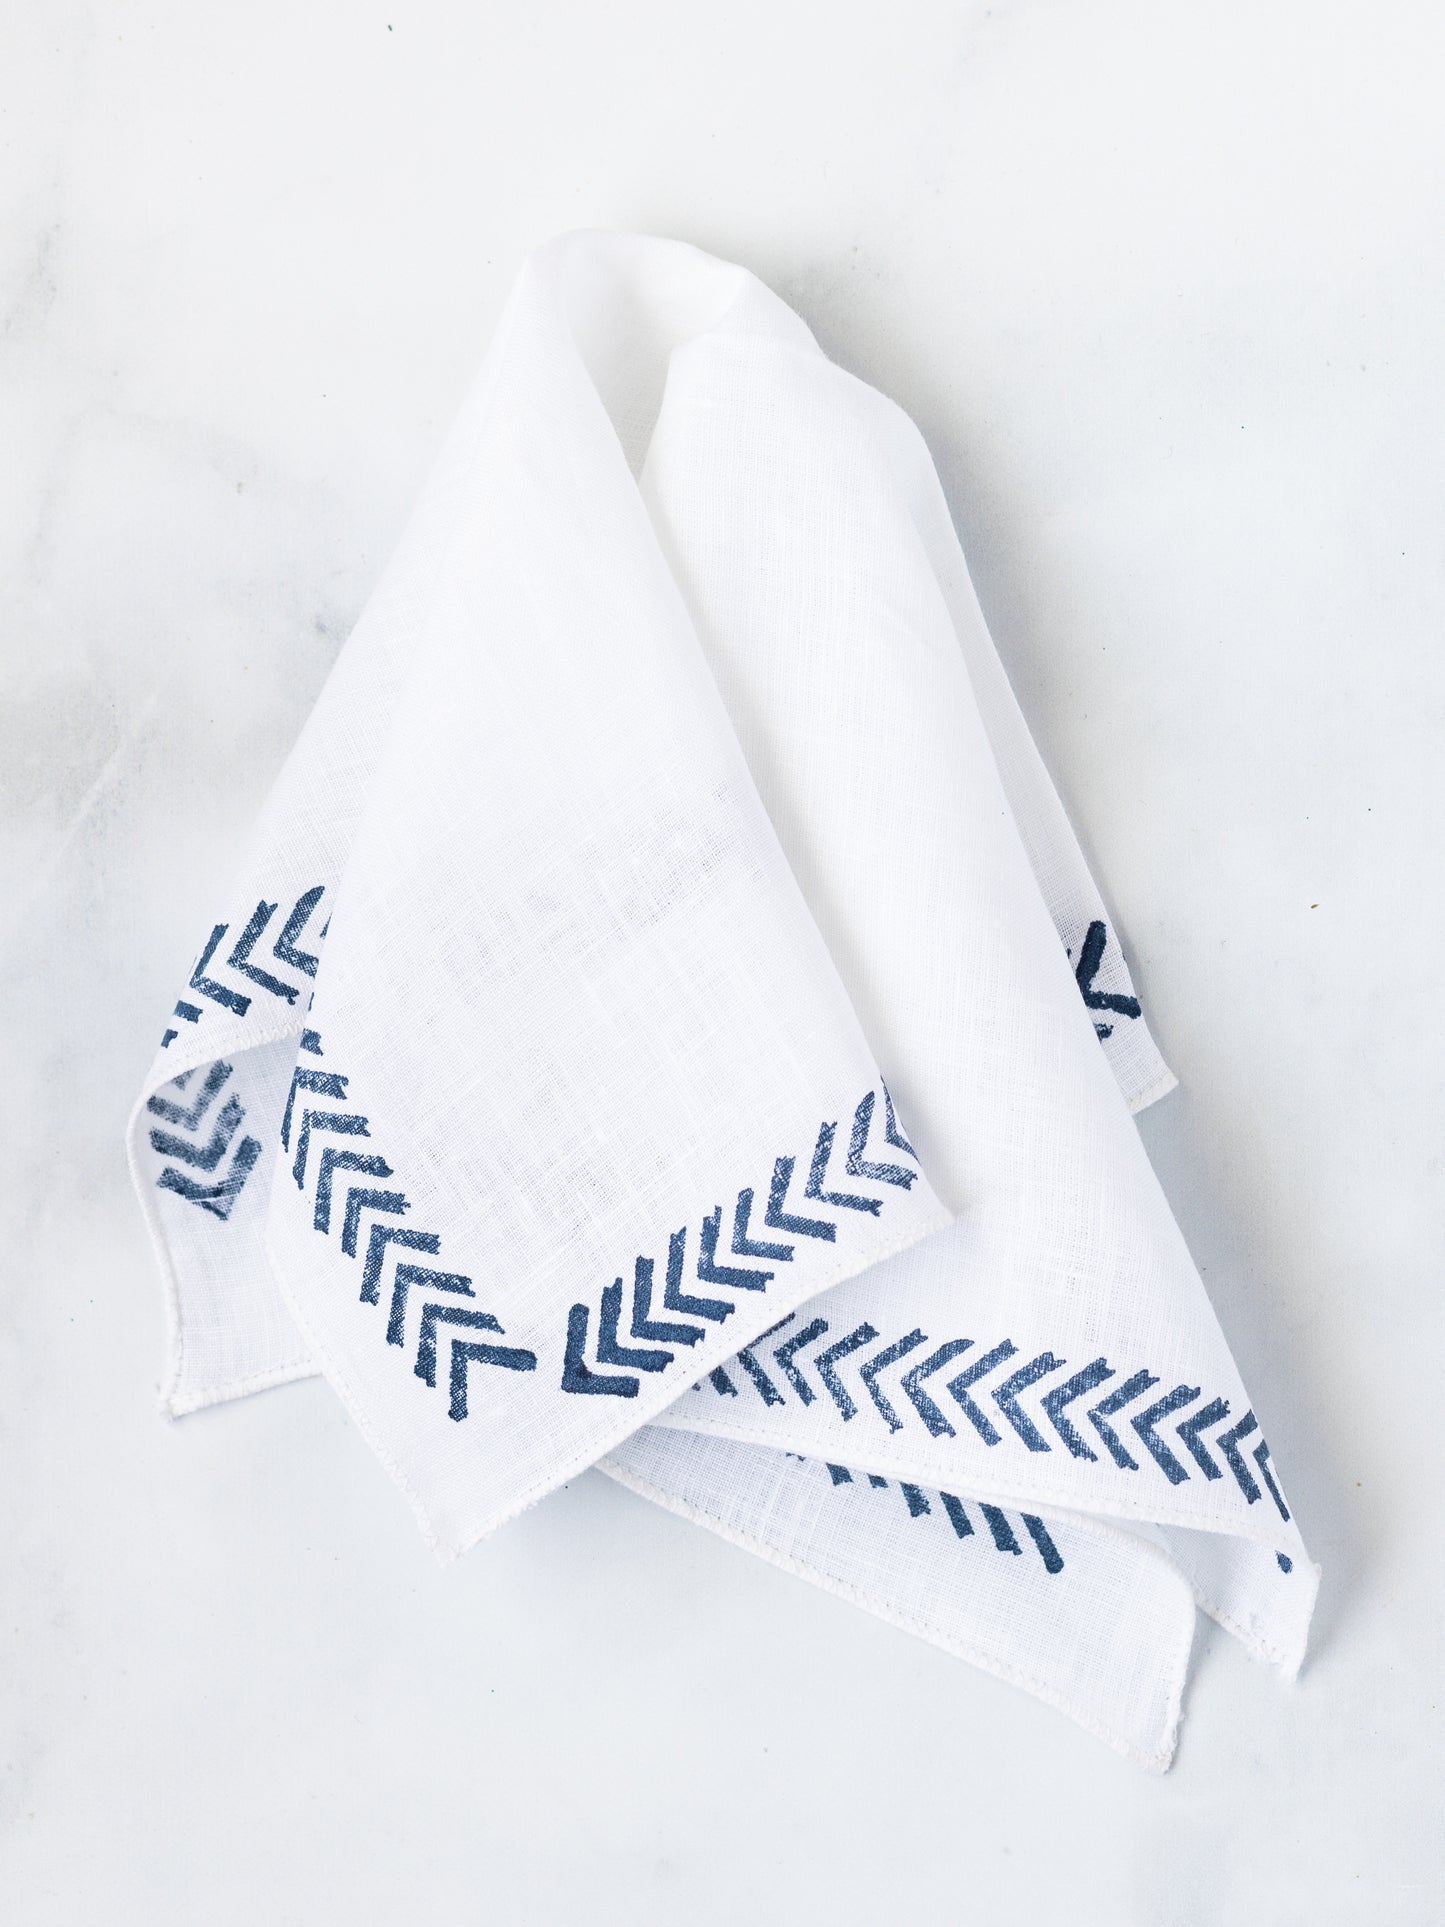 Pocket Squares - White Linen with Arrows, Navy